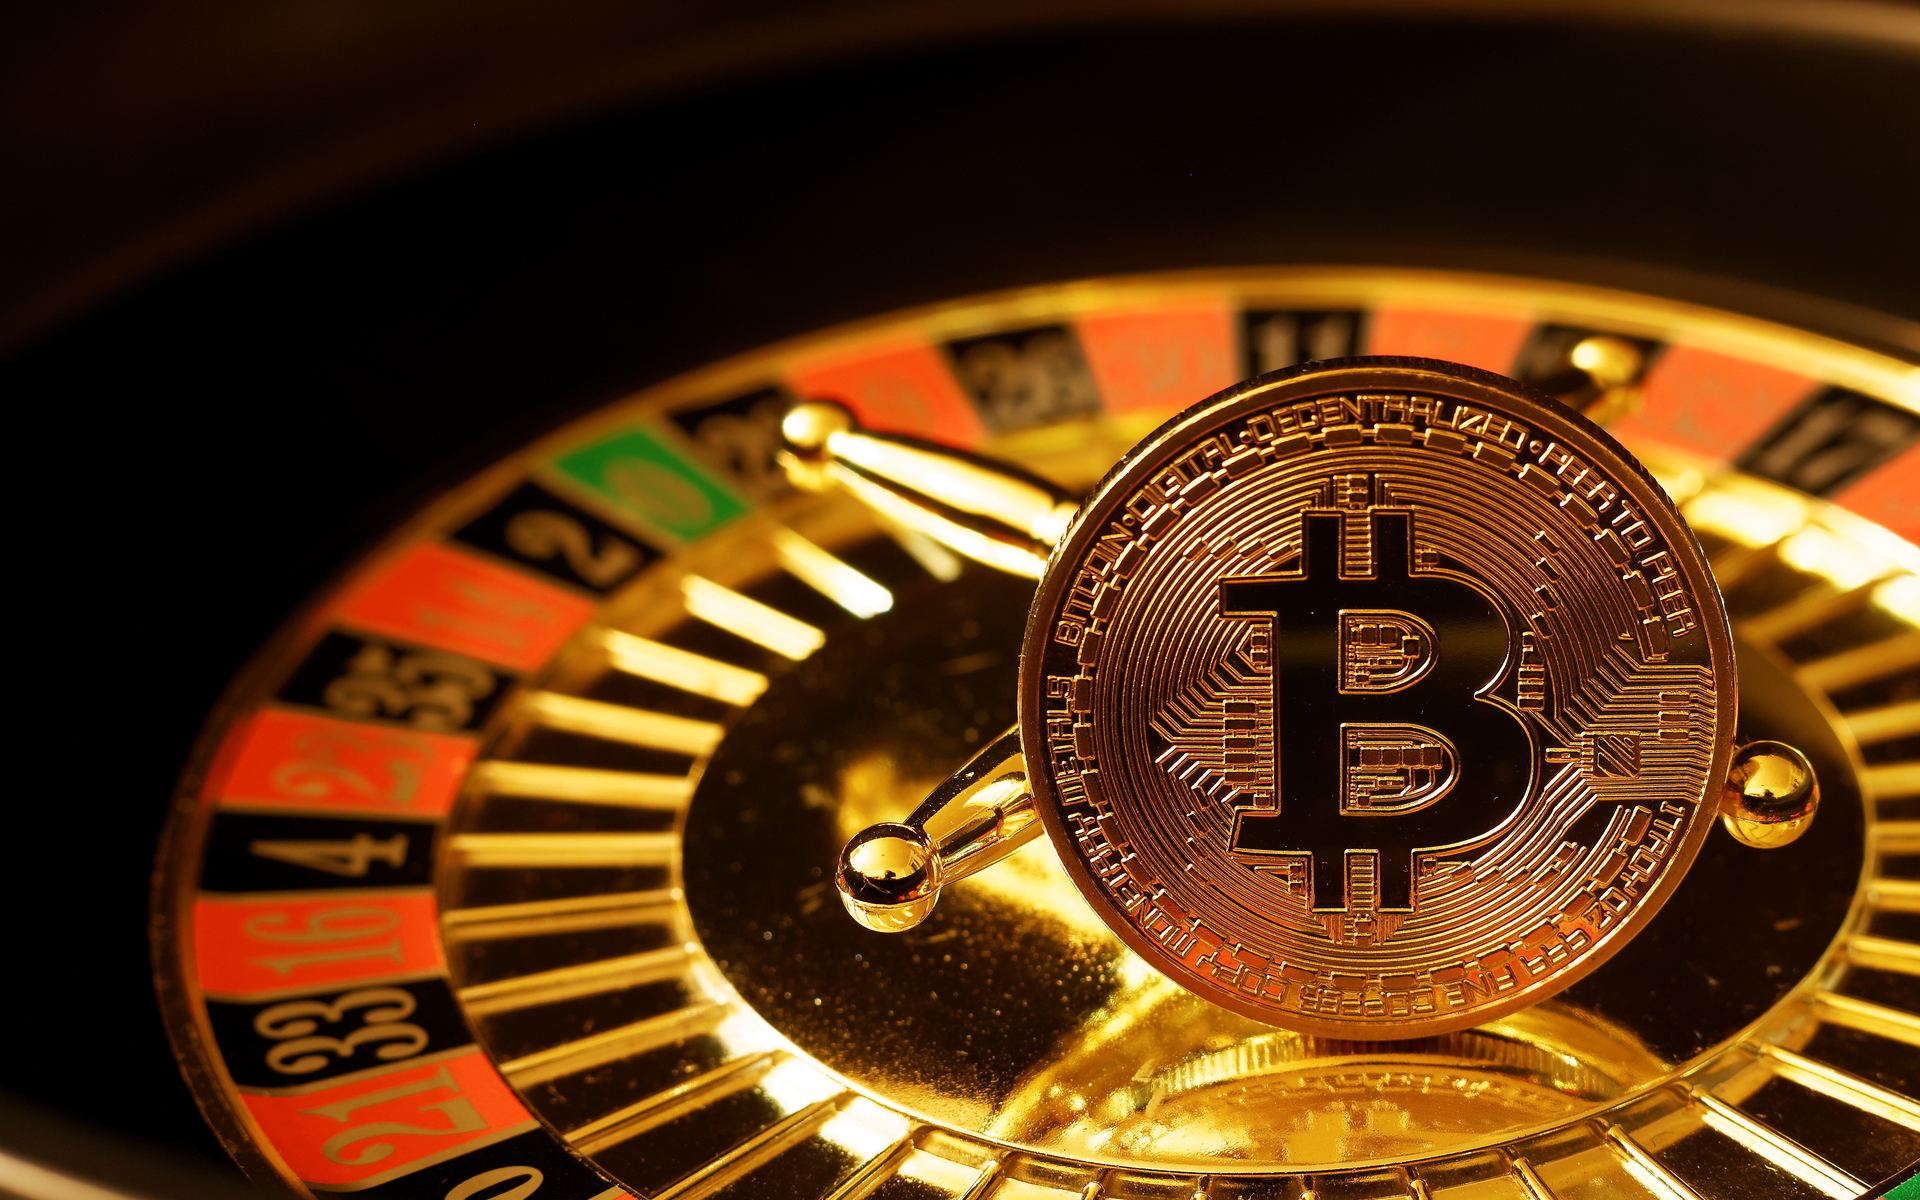 Btc Casino – Get Withdrawal In Just 5 Minutes!